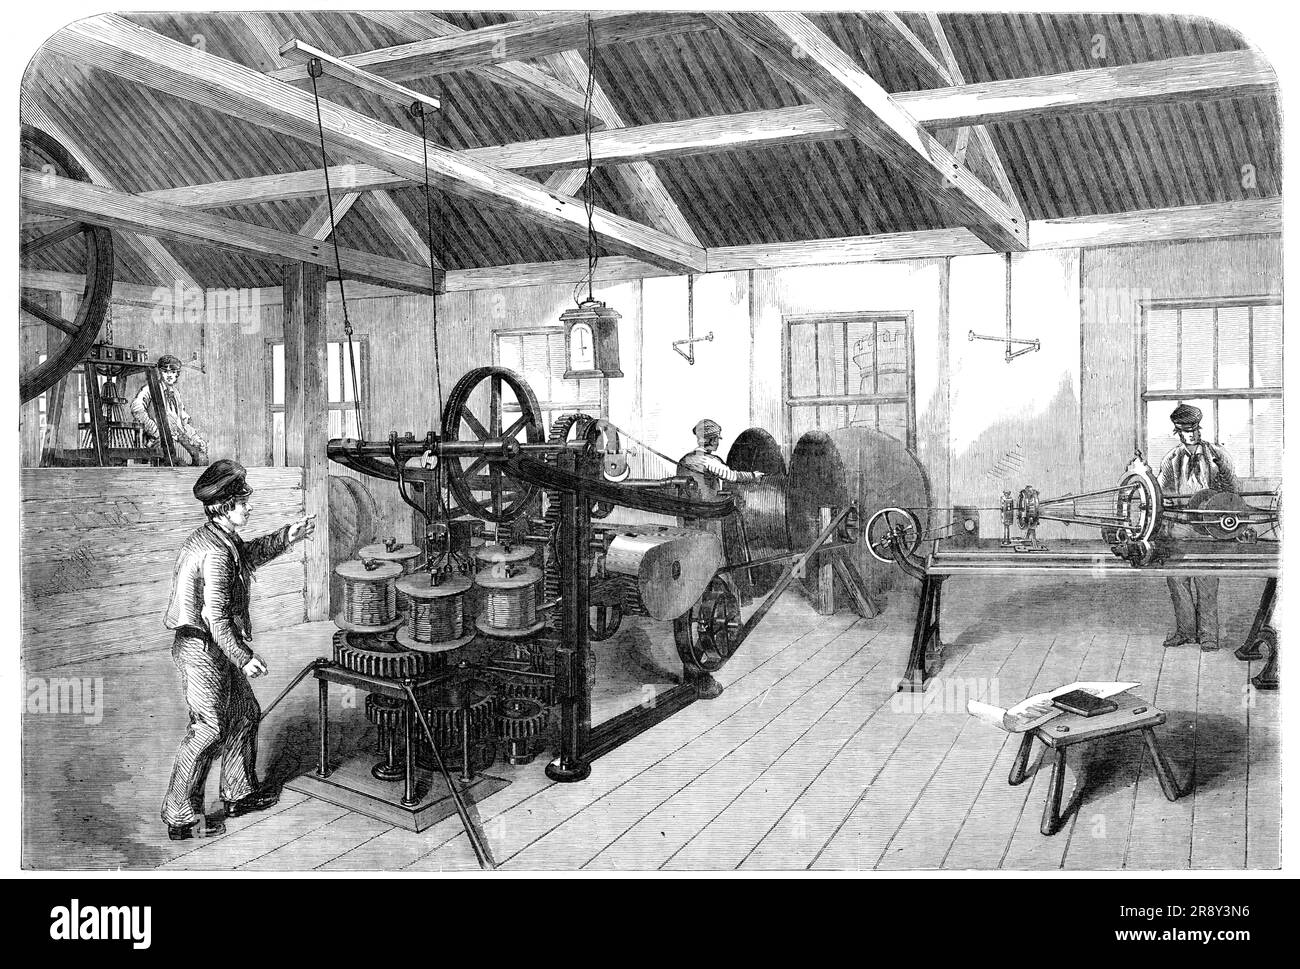 Manufacture of the Atlantic Submarine Cable, at Glass, Elliott, and Co.'s Works, East Greenwich, [London], 1857. The firm has '...undertaken to complete 1250 miles within a specified period...The Atlantic cable may be divided into two parts, the core and the armour - the former being the conductor to be actually employed in the transmission of electrical sensations under the ocean between Europe and America, the latter only a protective and strengthening assistant whereby to deposit the insulated wire at the bottom of the sea. The core is composed of seven copper wires of the gauge known as No Stock Photo